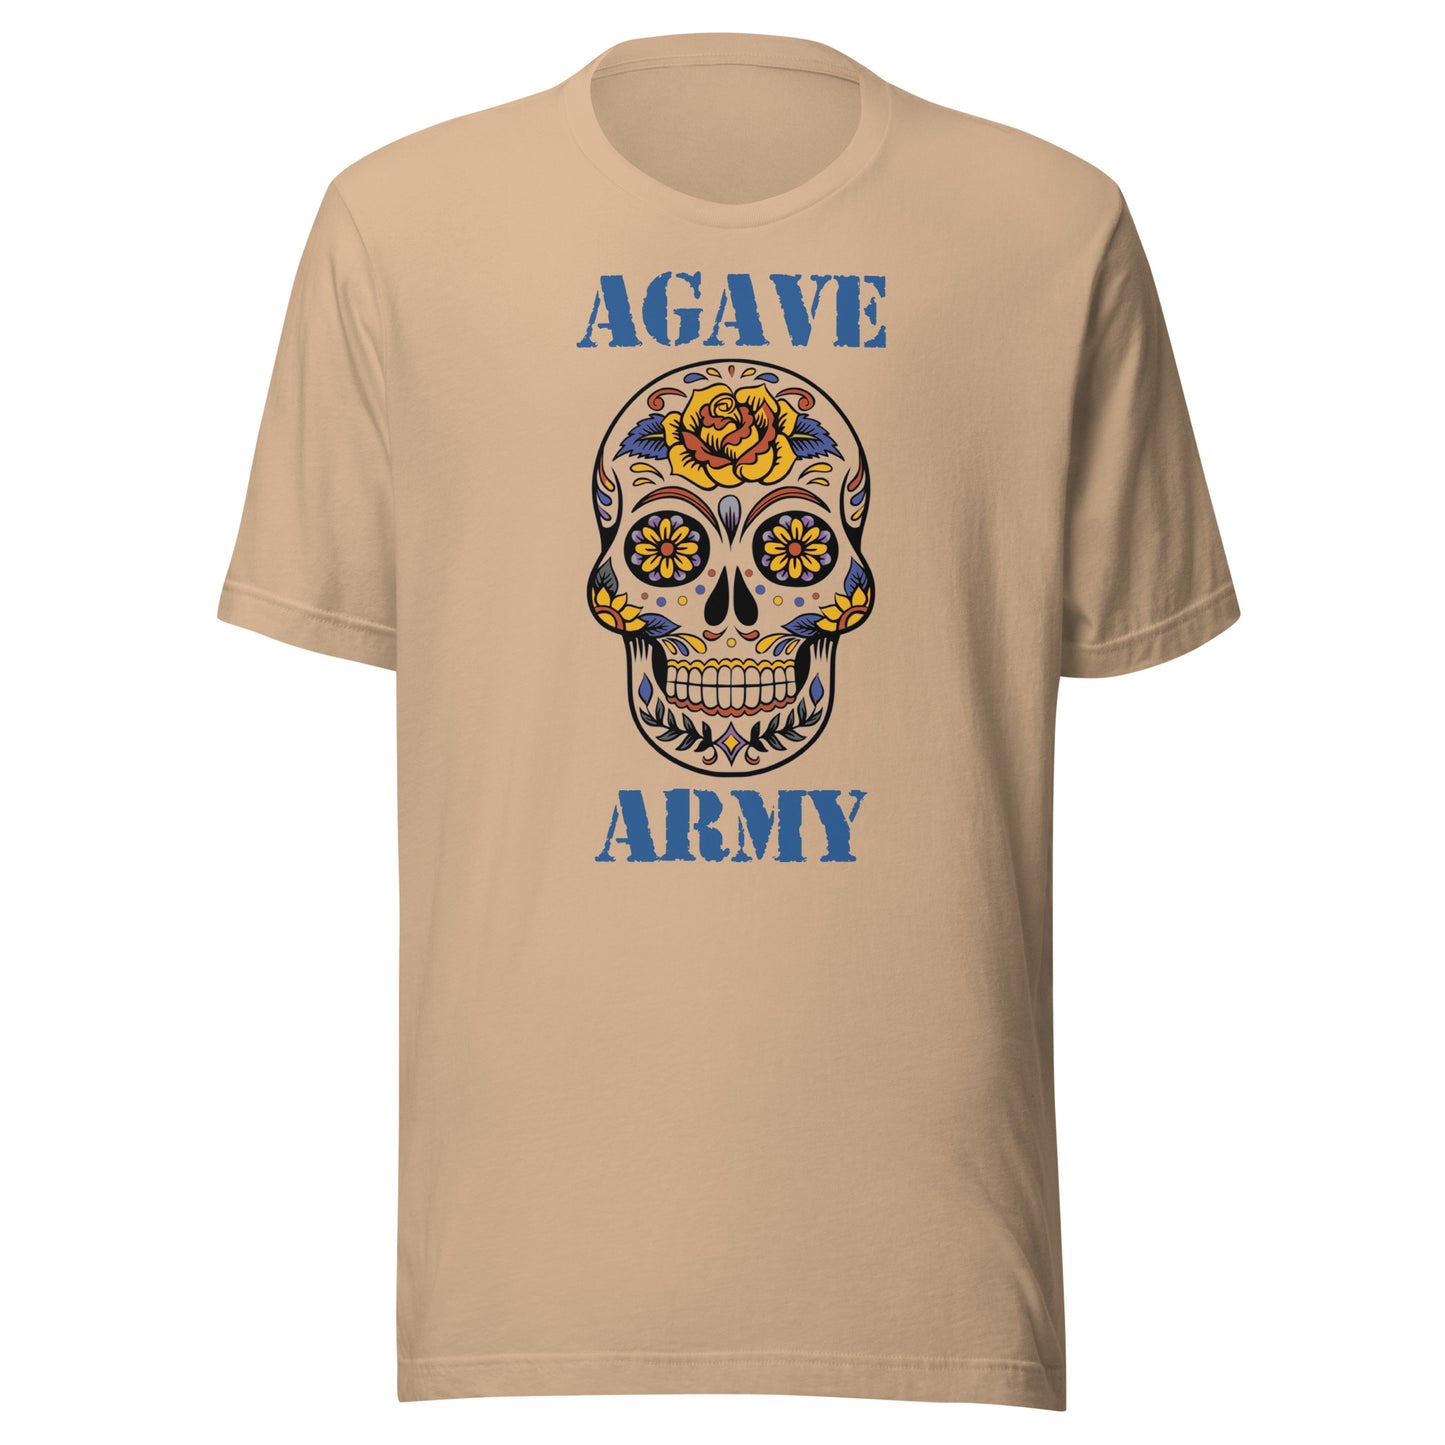 Agave Army His or Her Tee